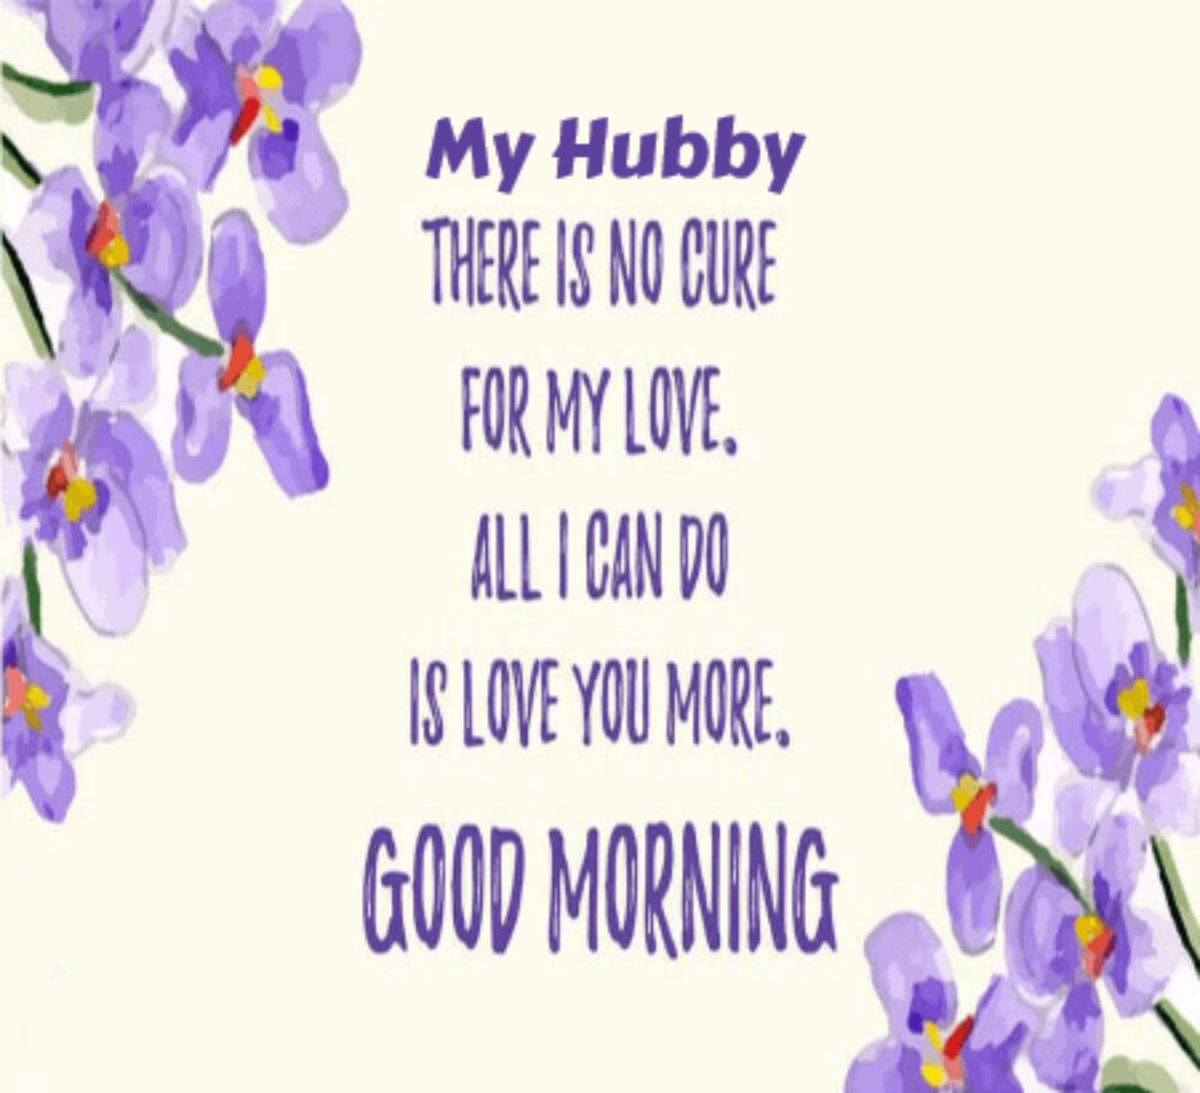 Good Morning My Hubby - Good Morning Wishes With Name